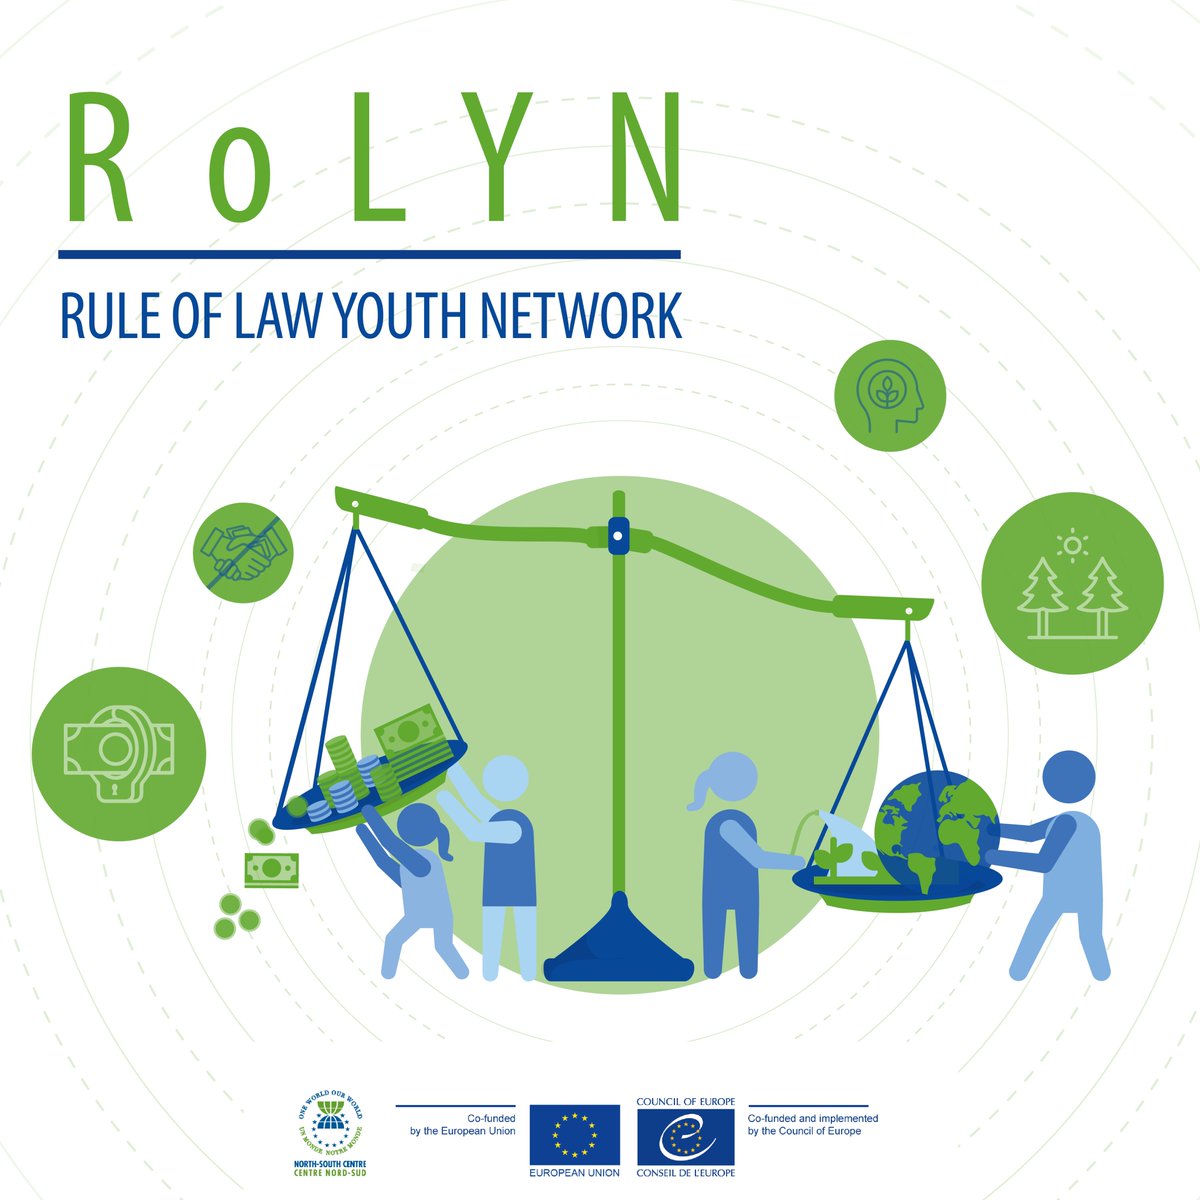 🌍 The Rule of Law Youth Network (RoLYN) project, combating corruption & environmental damage, welcomes applications until 2 Jan: go.coe.int/eEKAN 🎬 Interviews from experts on human rights, economic crimes & the environment: coe.int/en/web/north-s… #RuleOfLawYouthNetwork